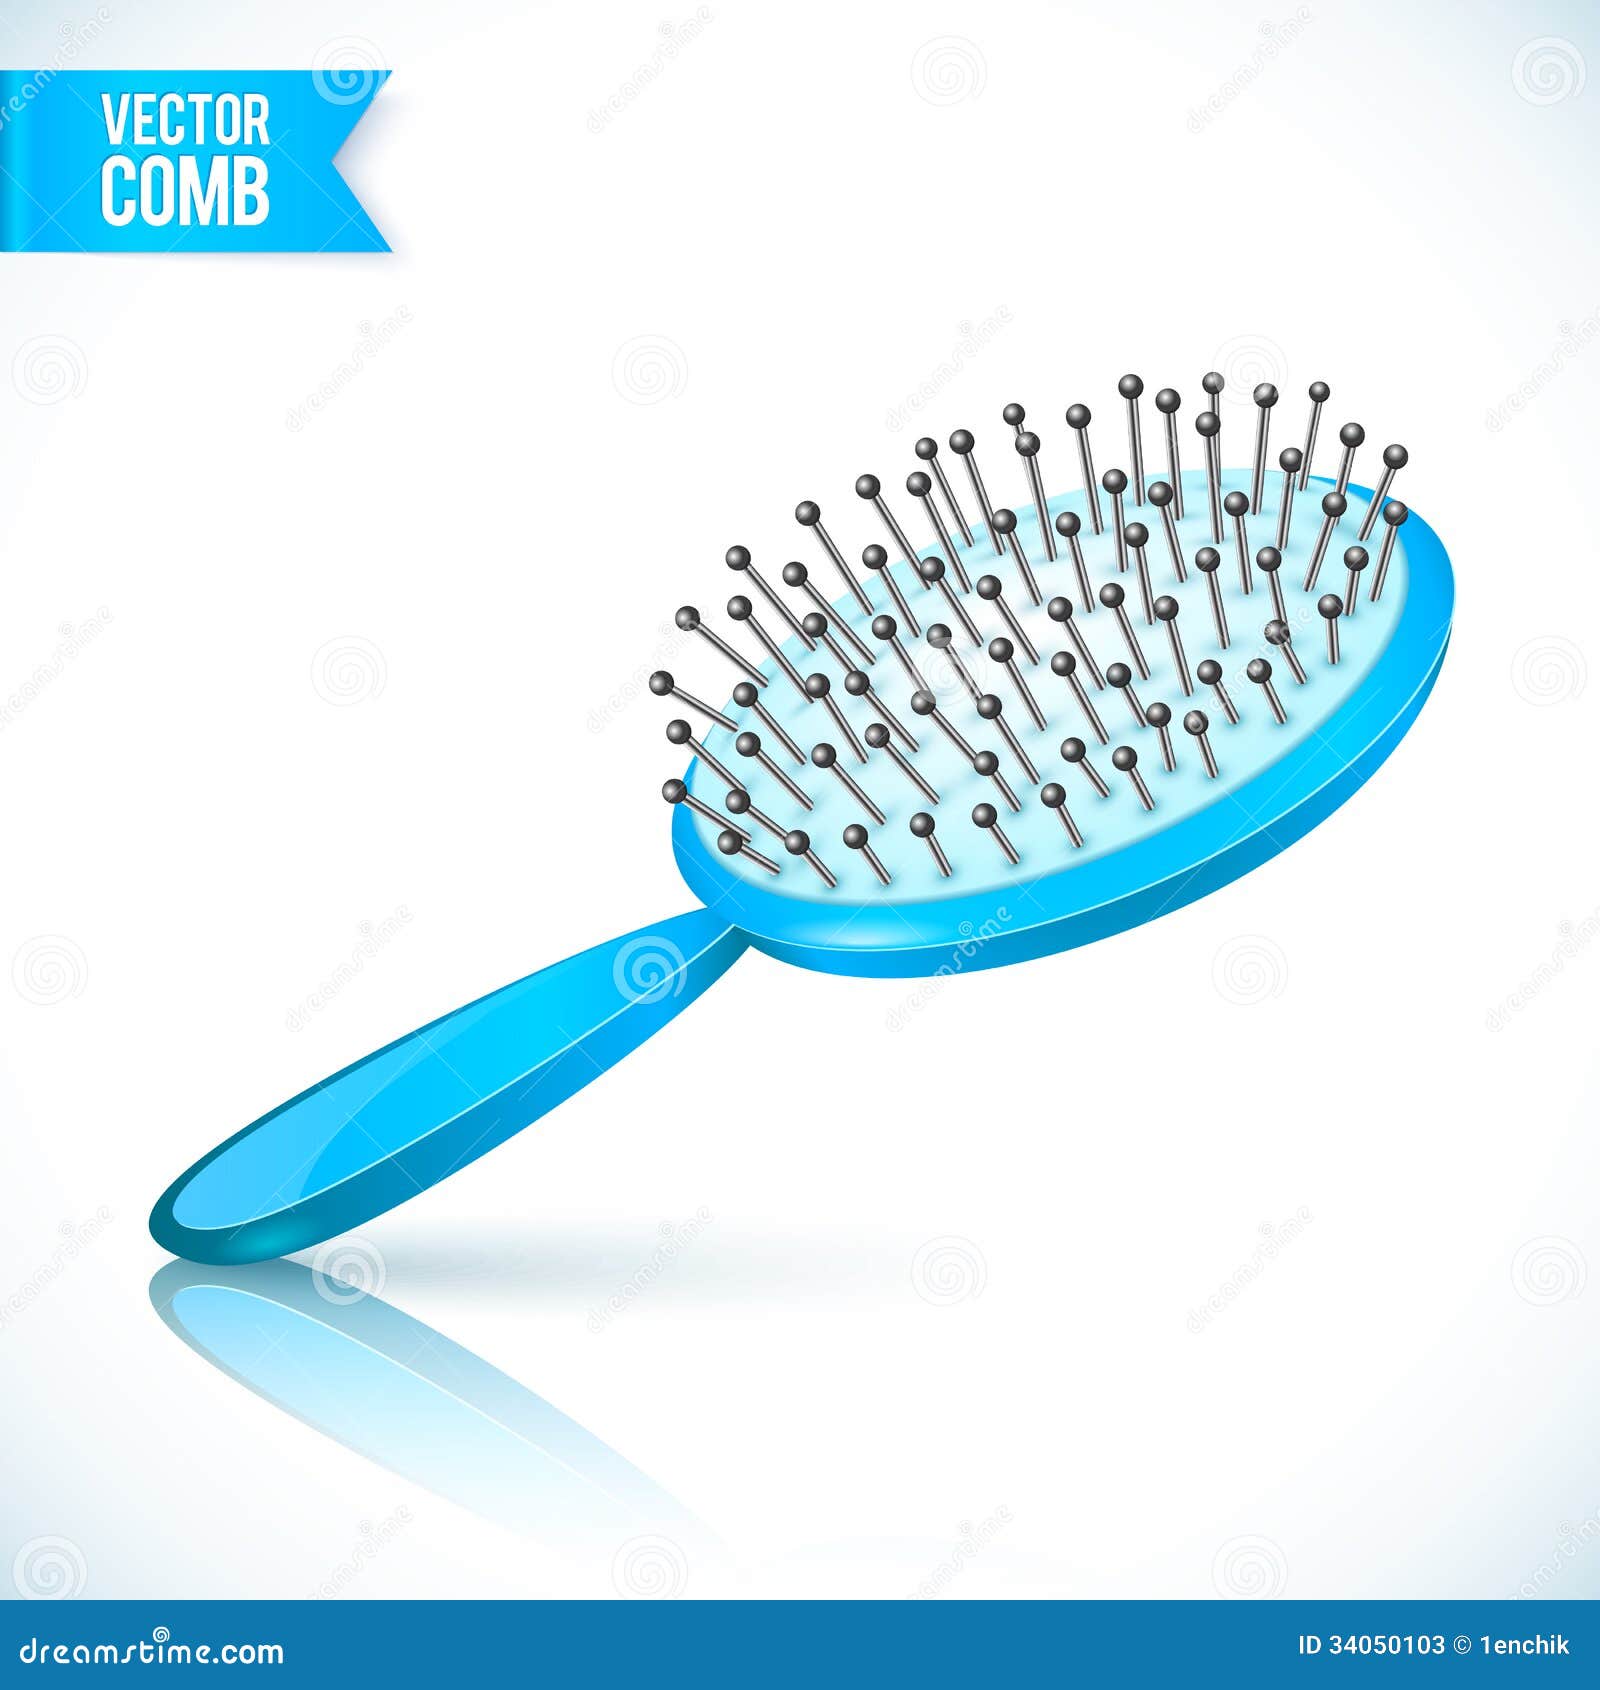 https://thumbs.dreamstime.com/z/realistic-vector-blue-comb-brush-reflection-34050103.jpg